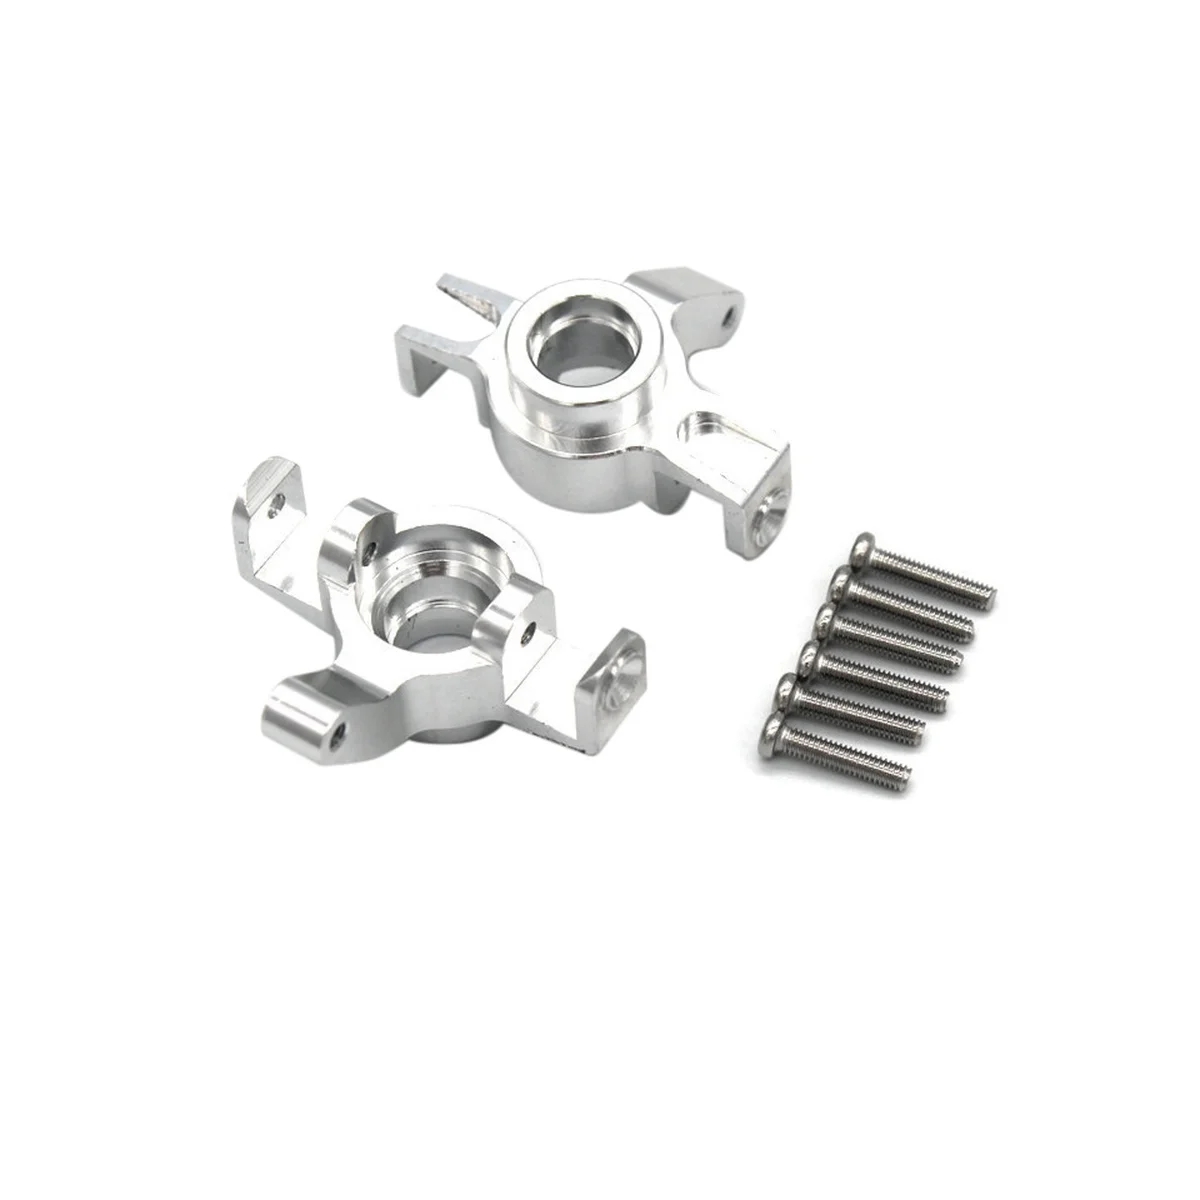 

Metal Steering Cup Steering Block for MJX Hyper Go 14301 14302 1/14 RC Car Upgrades Parts Accessories, Silver